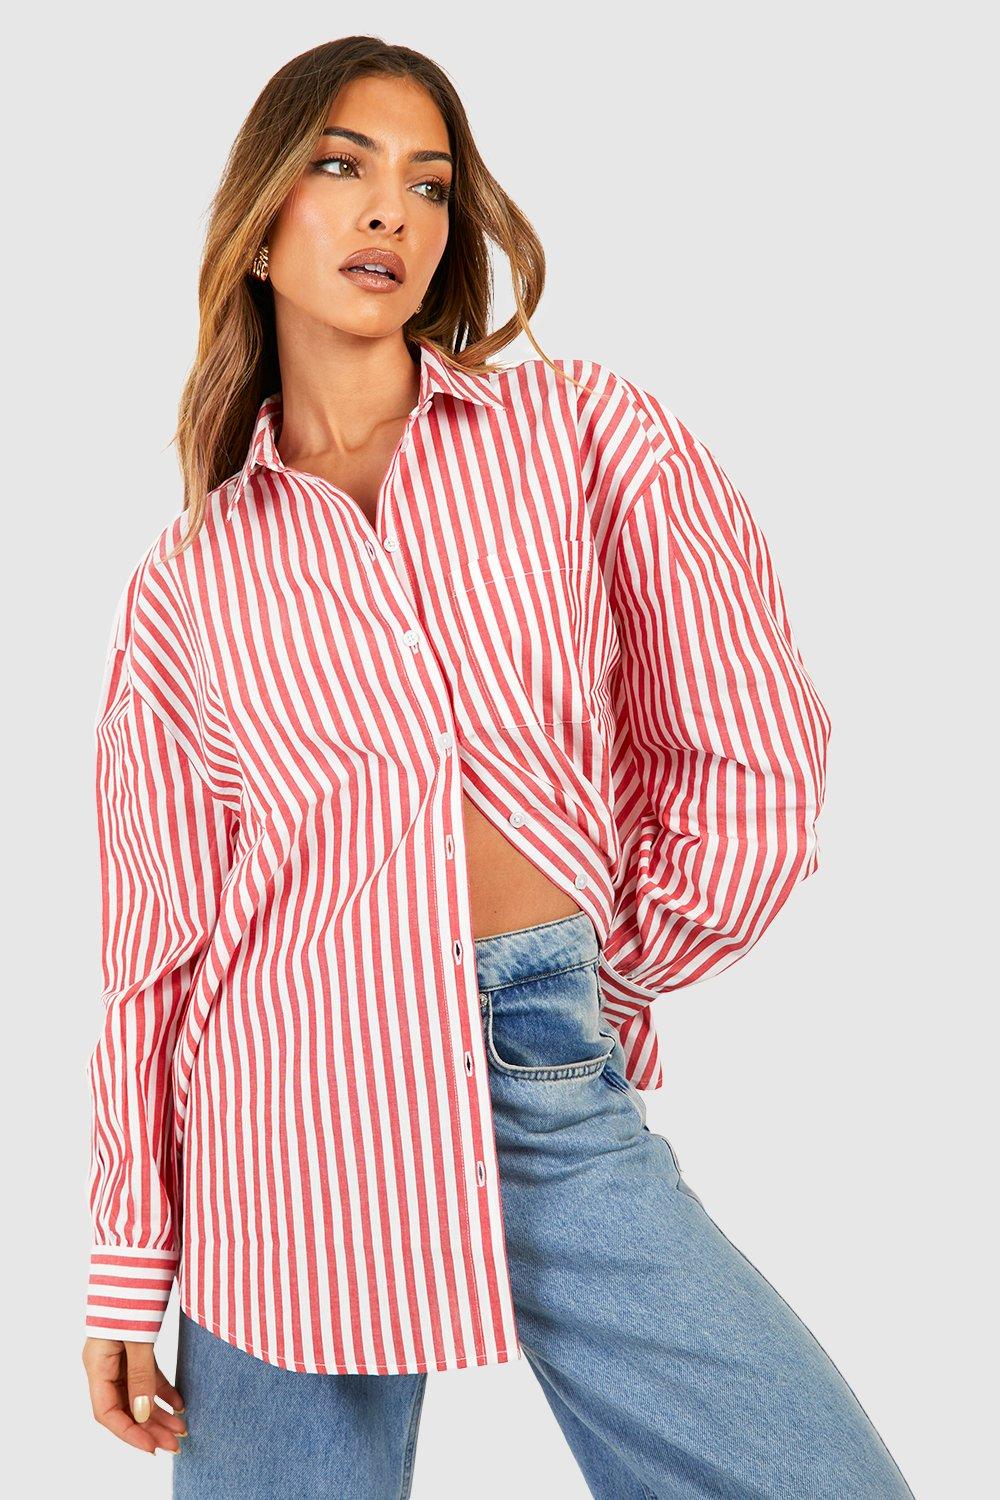 Image of Camicia oversize a righe verticali Candy, Rosso